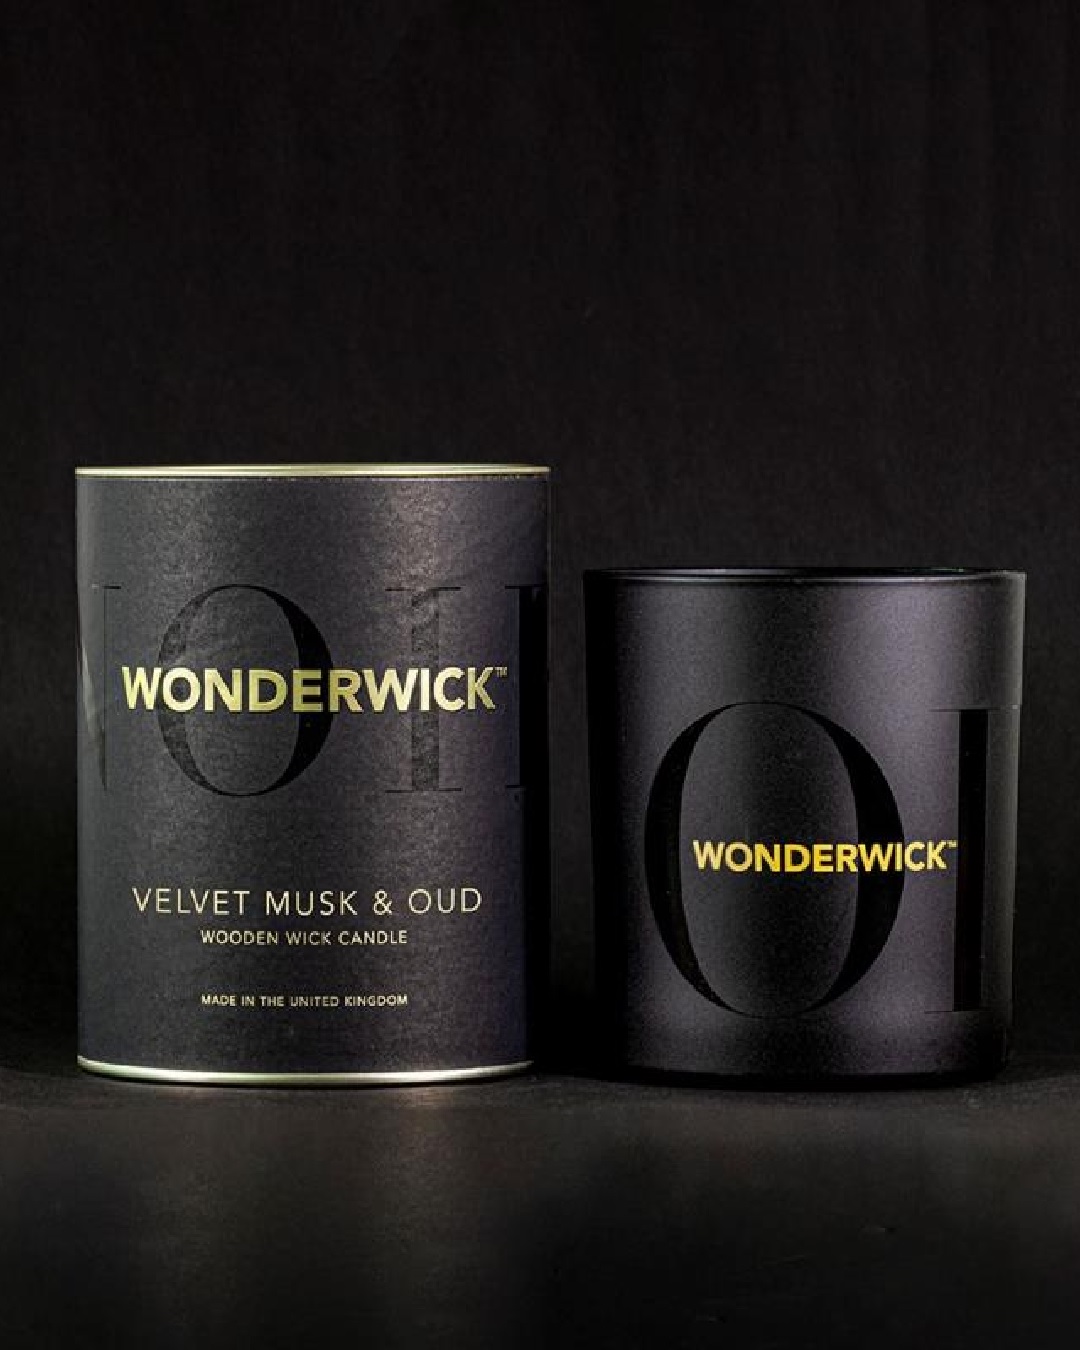 Velvet musk and oud wonderwick candle